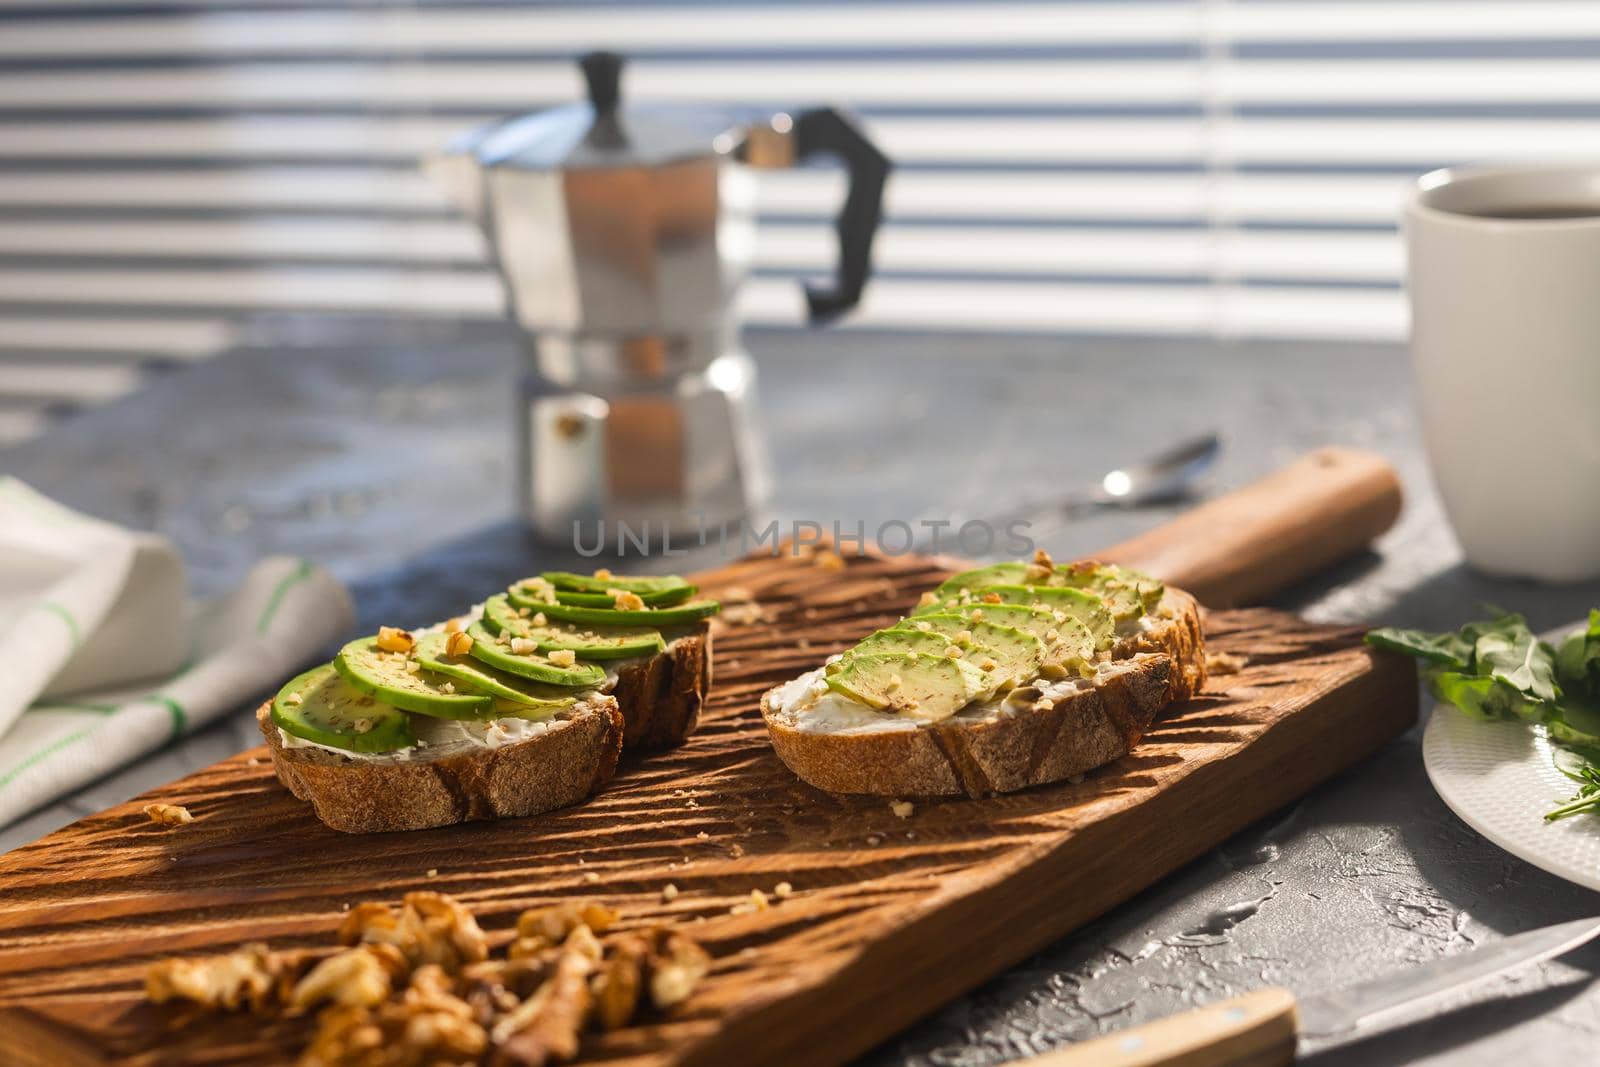 Sliced avocado on toast bread with nuts and coffee. Breakfast and healthy food concept. by Satura86